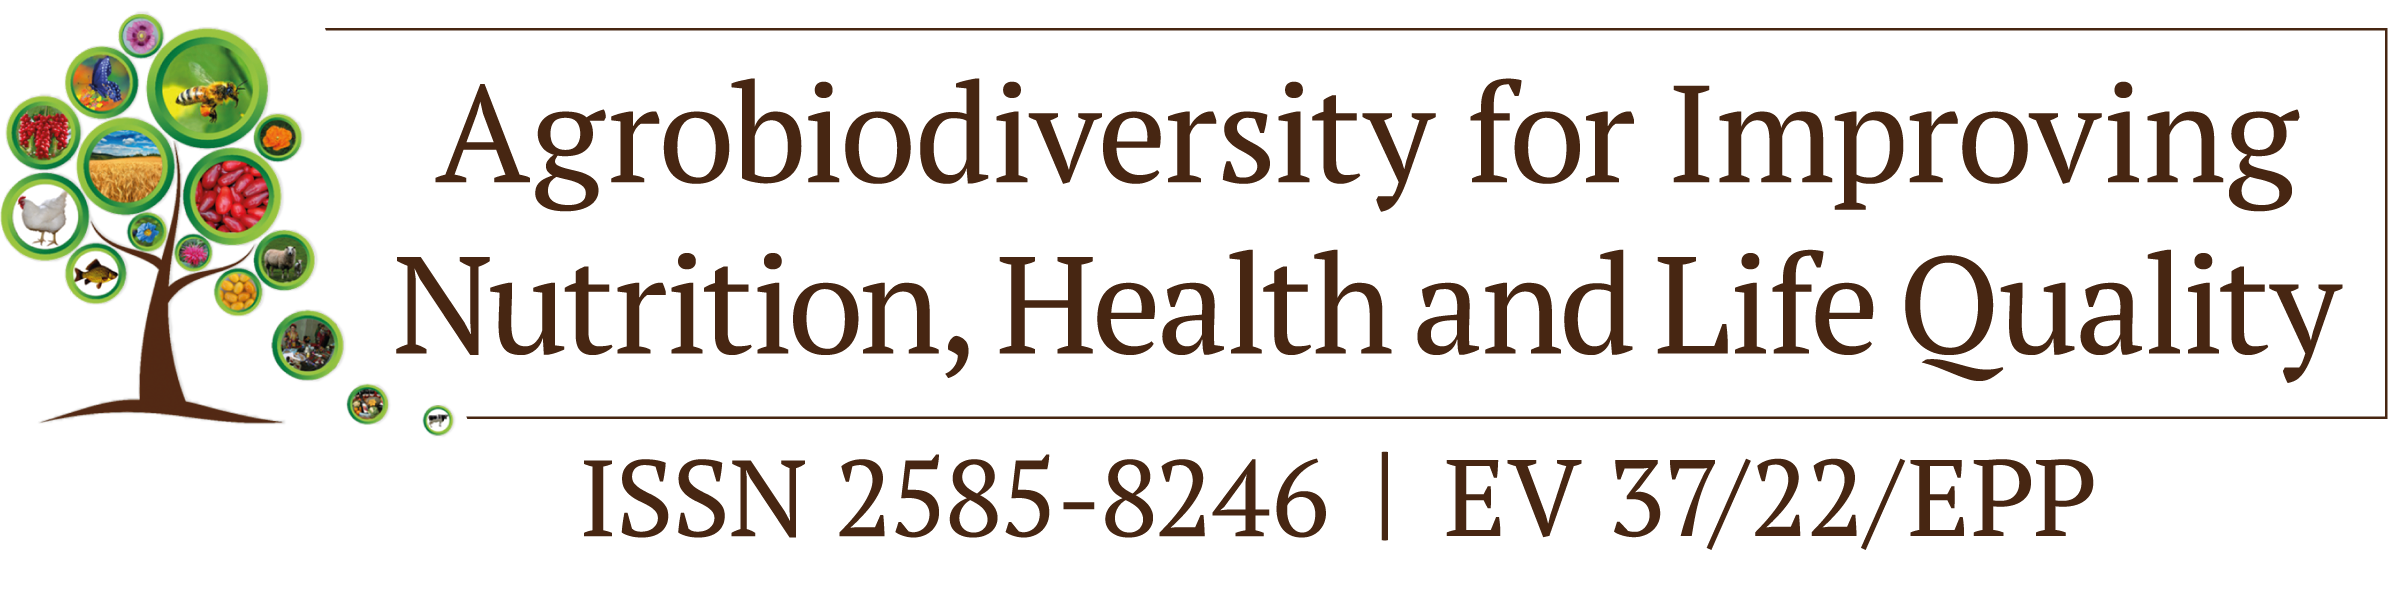 Agrobiodiversity for Improving Nutrition, Health and Life Quality logo